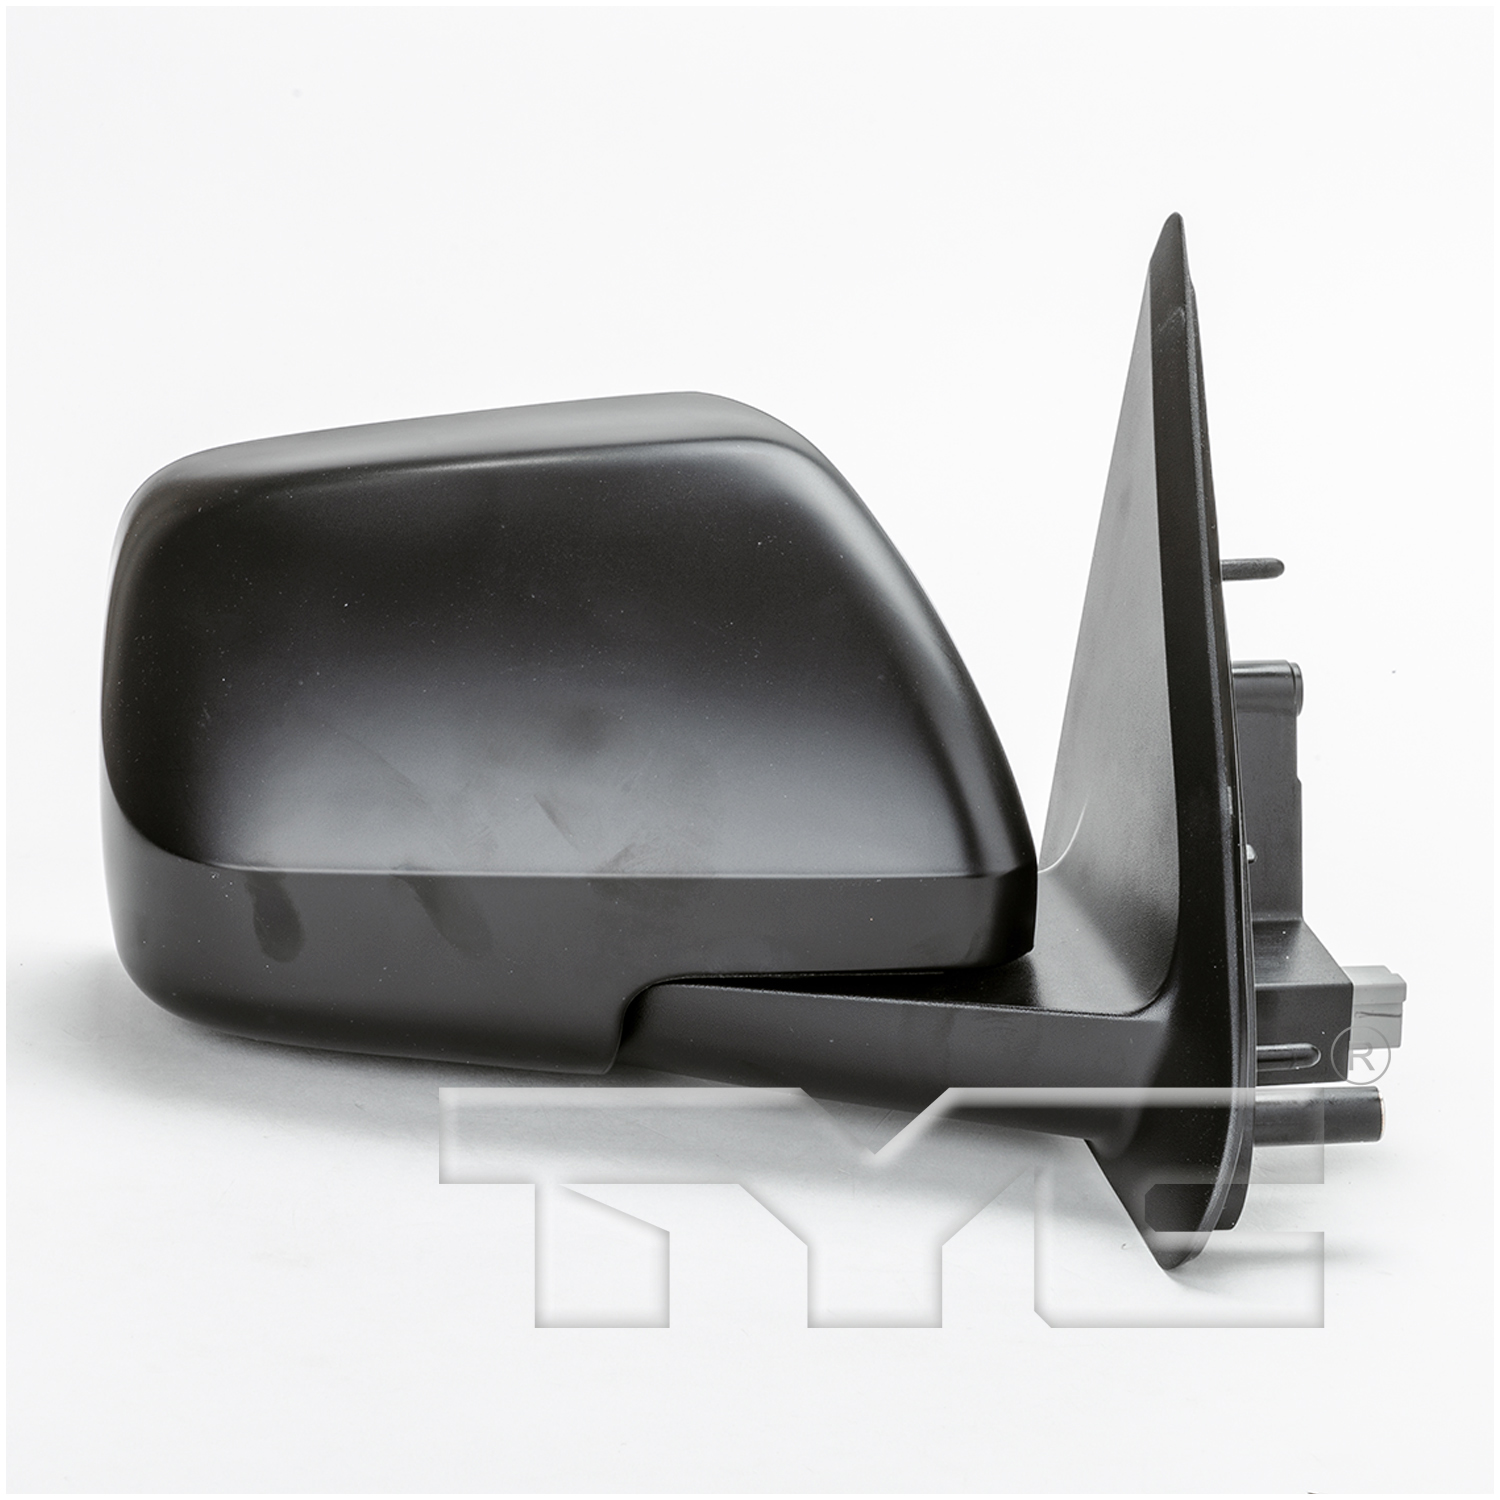 Aftermarket MIRRORS for MERCURY - MARINER, MARINER,08-09,RT Mirror outside rear view